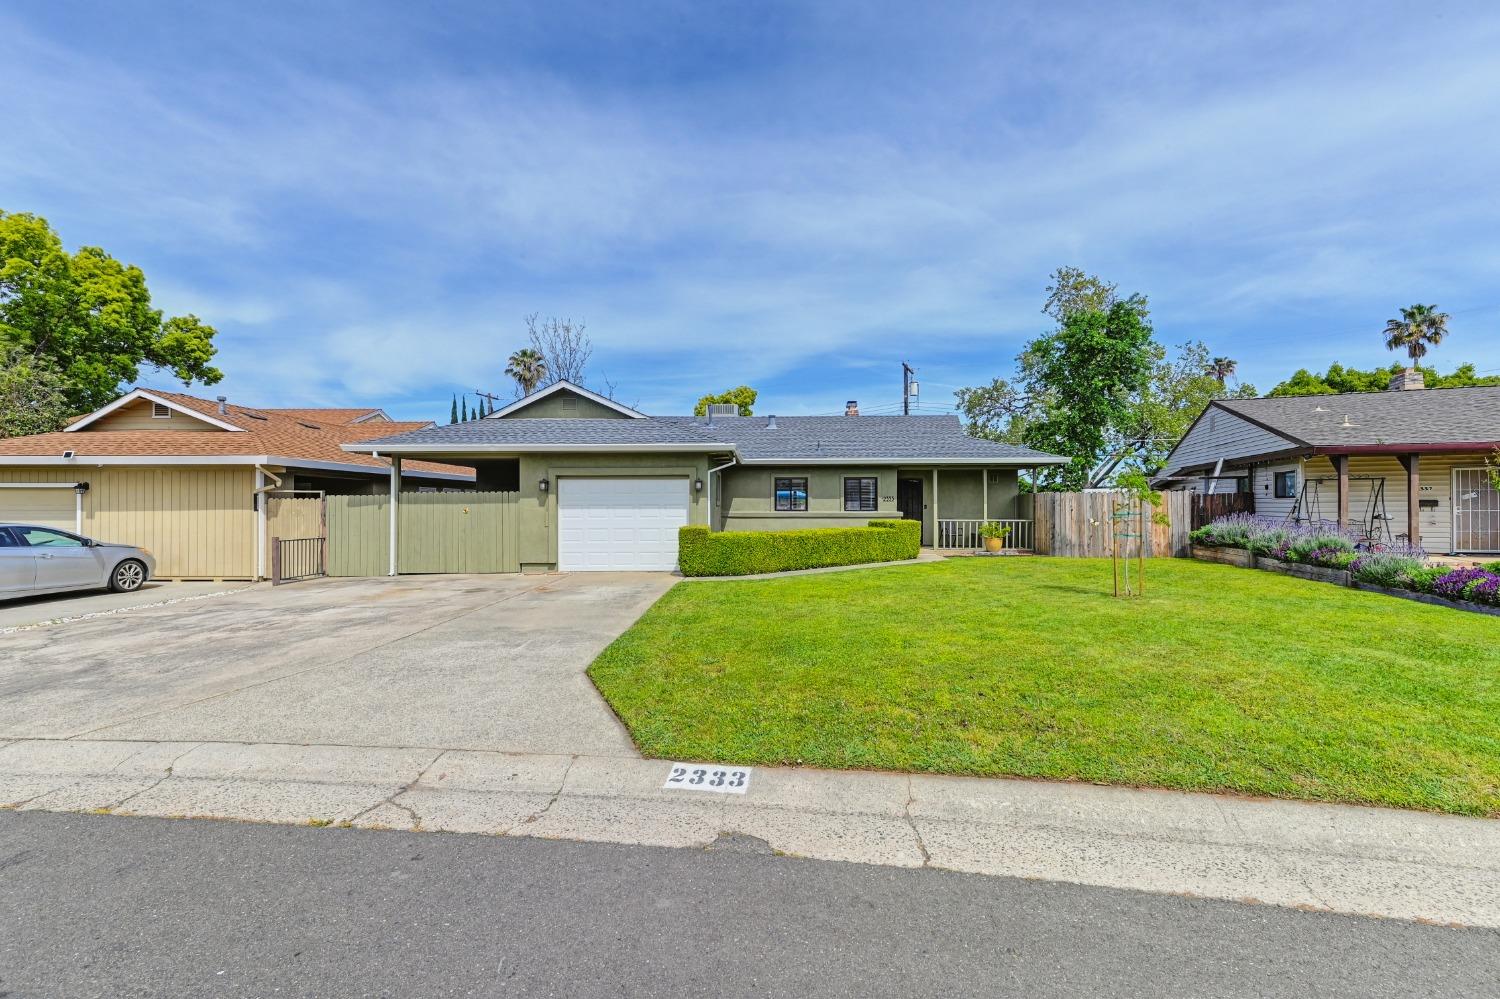 What a find!  Beautifully upgraded and maintained 3 bedroom 2 bath home on a large lot on a nice str